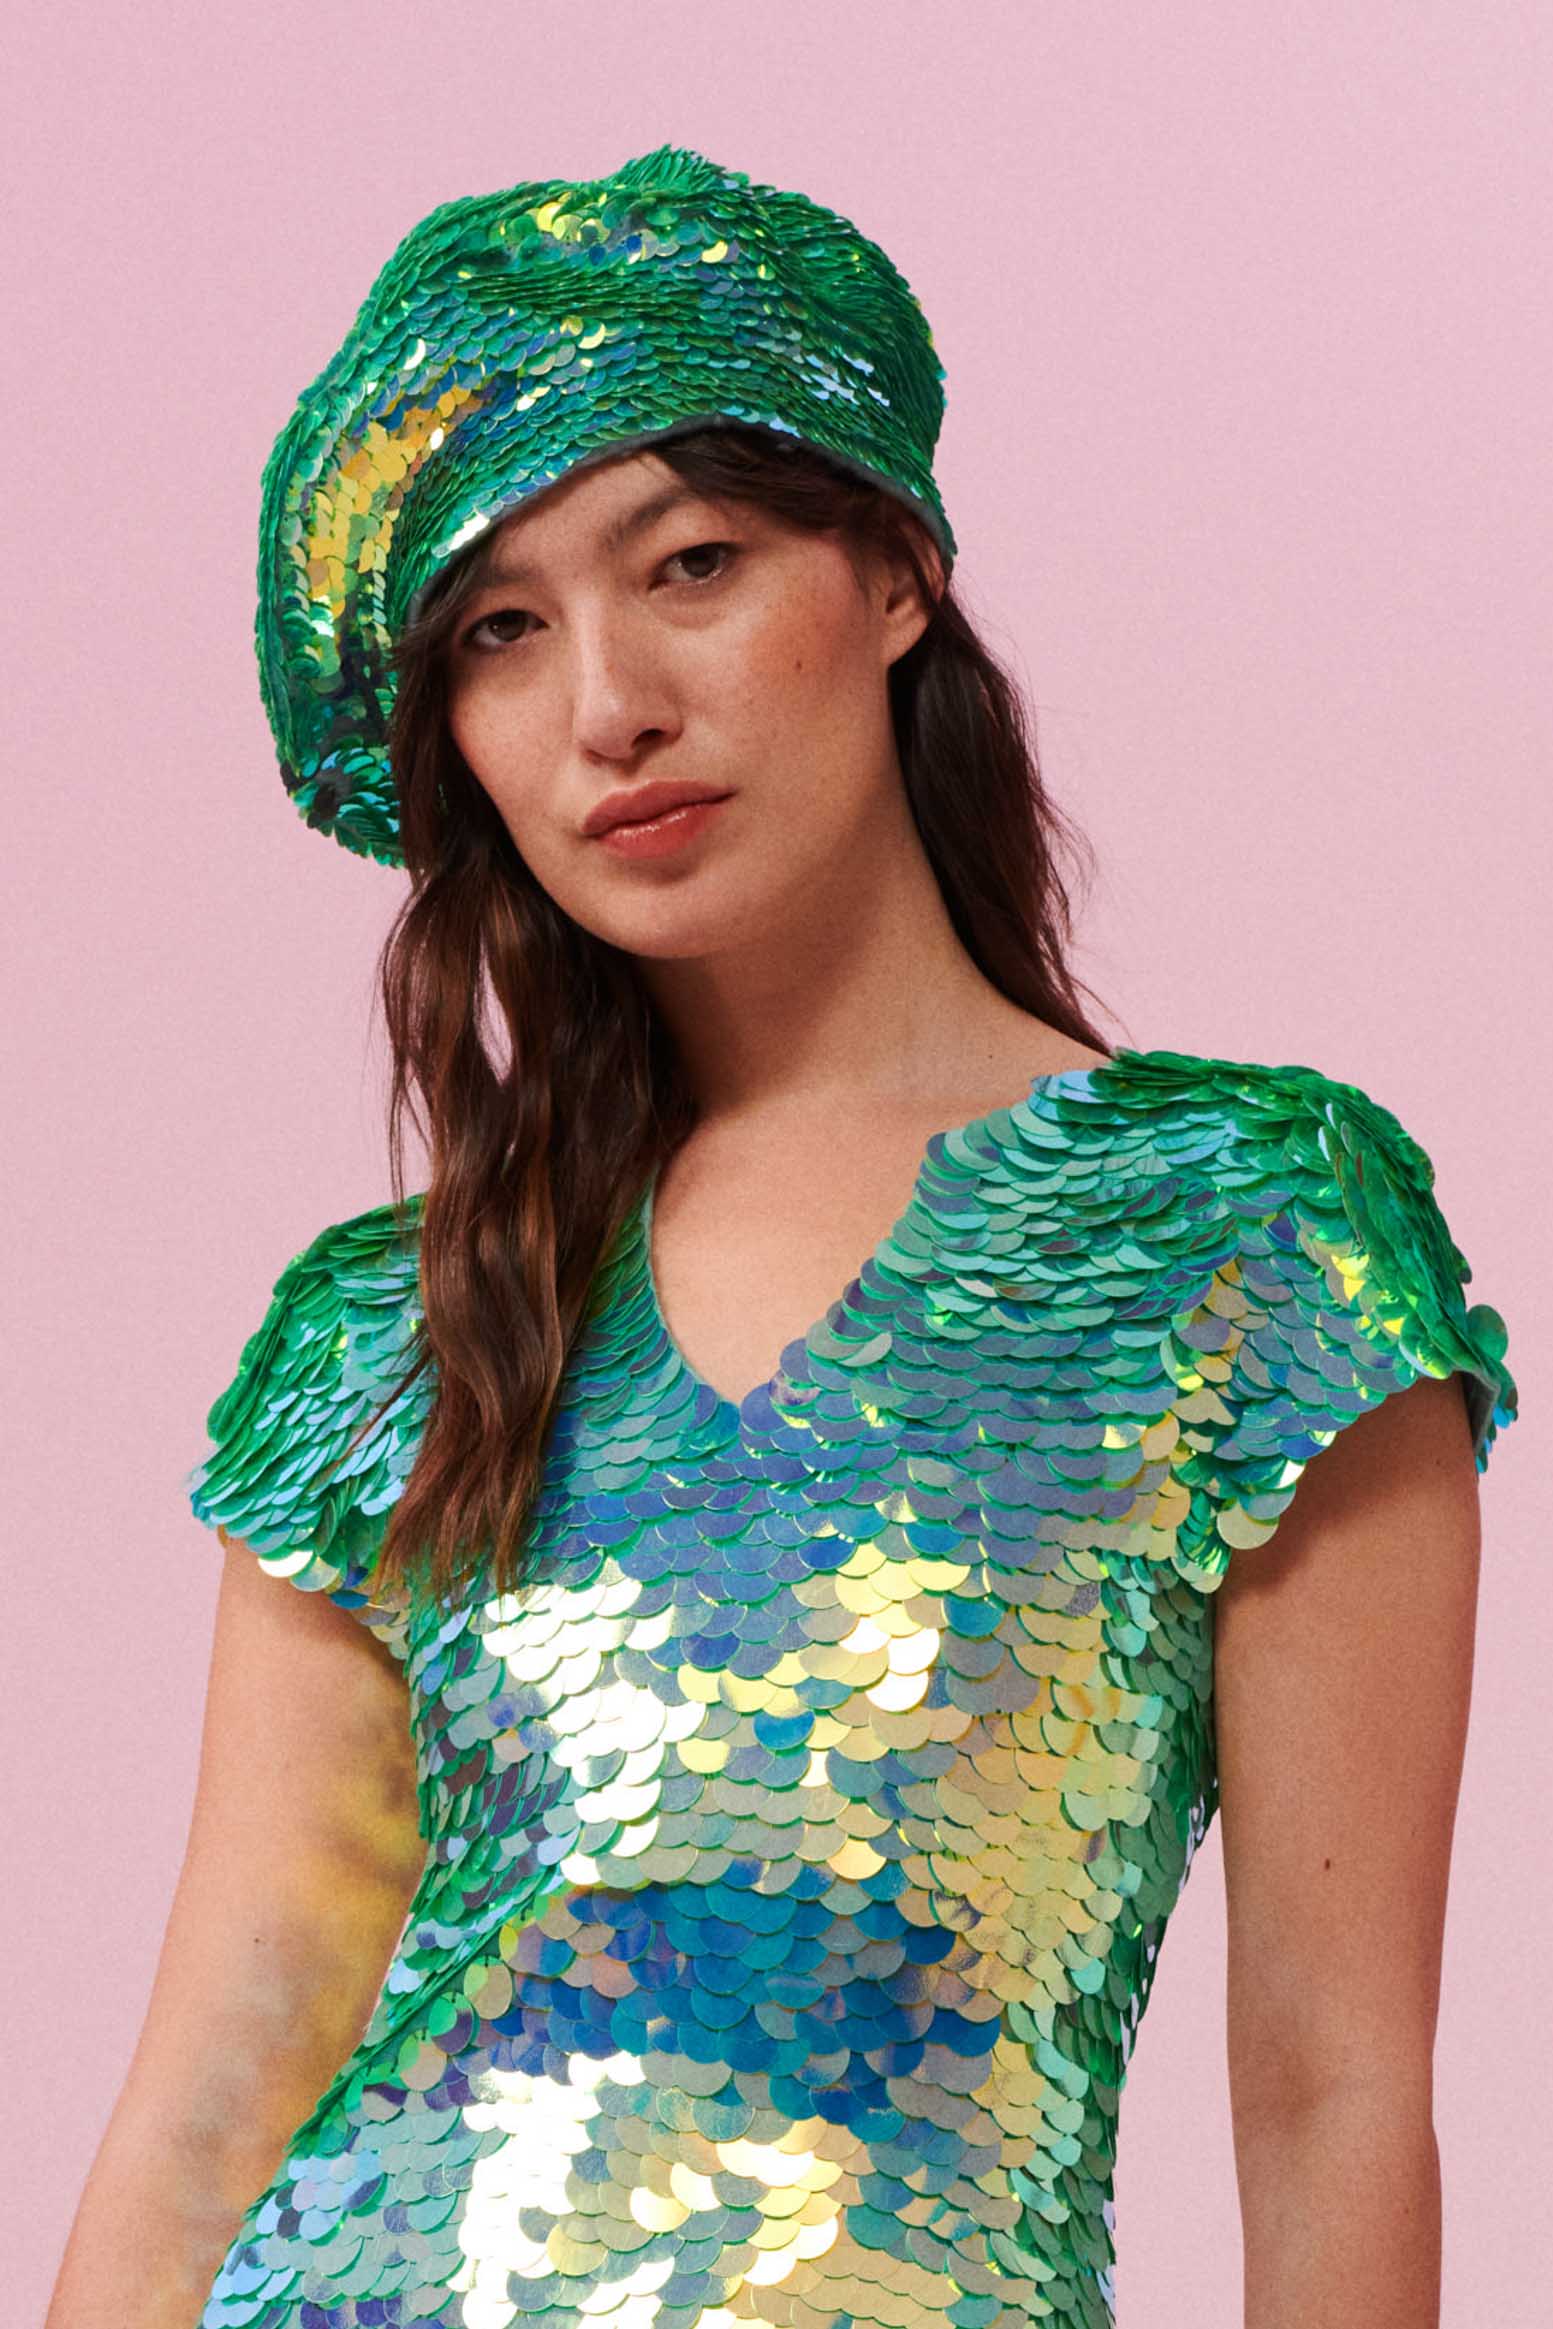 A woman with brown hair swept to the side, wearing a sequin beret made from round holographic sequins with hues of mint and sage green. The festival, woollen and sequin hat matches the sequin top that the model is wearing. The chameleon sequins glisten, creating a mix of shimmering colours.